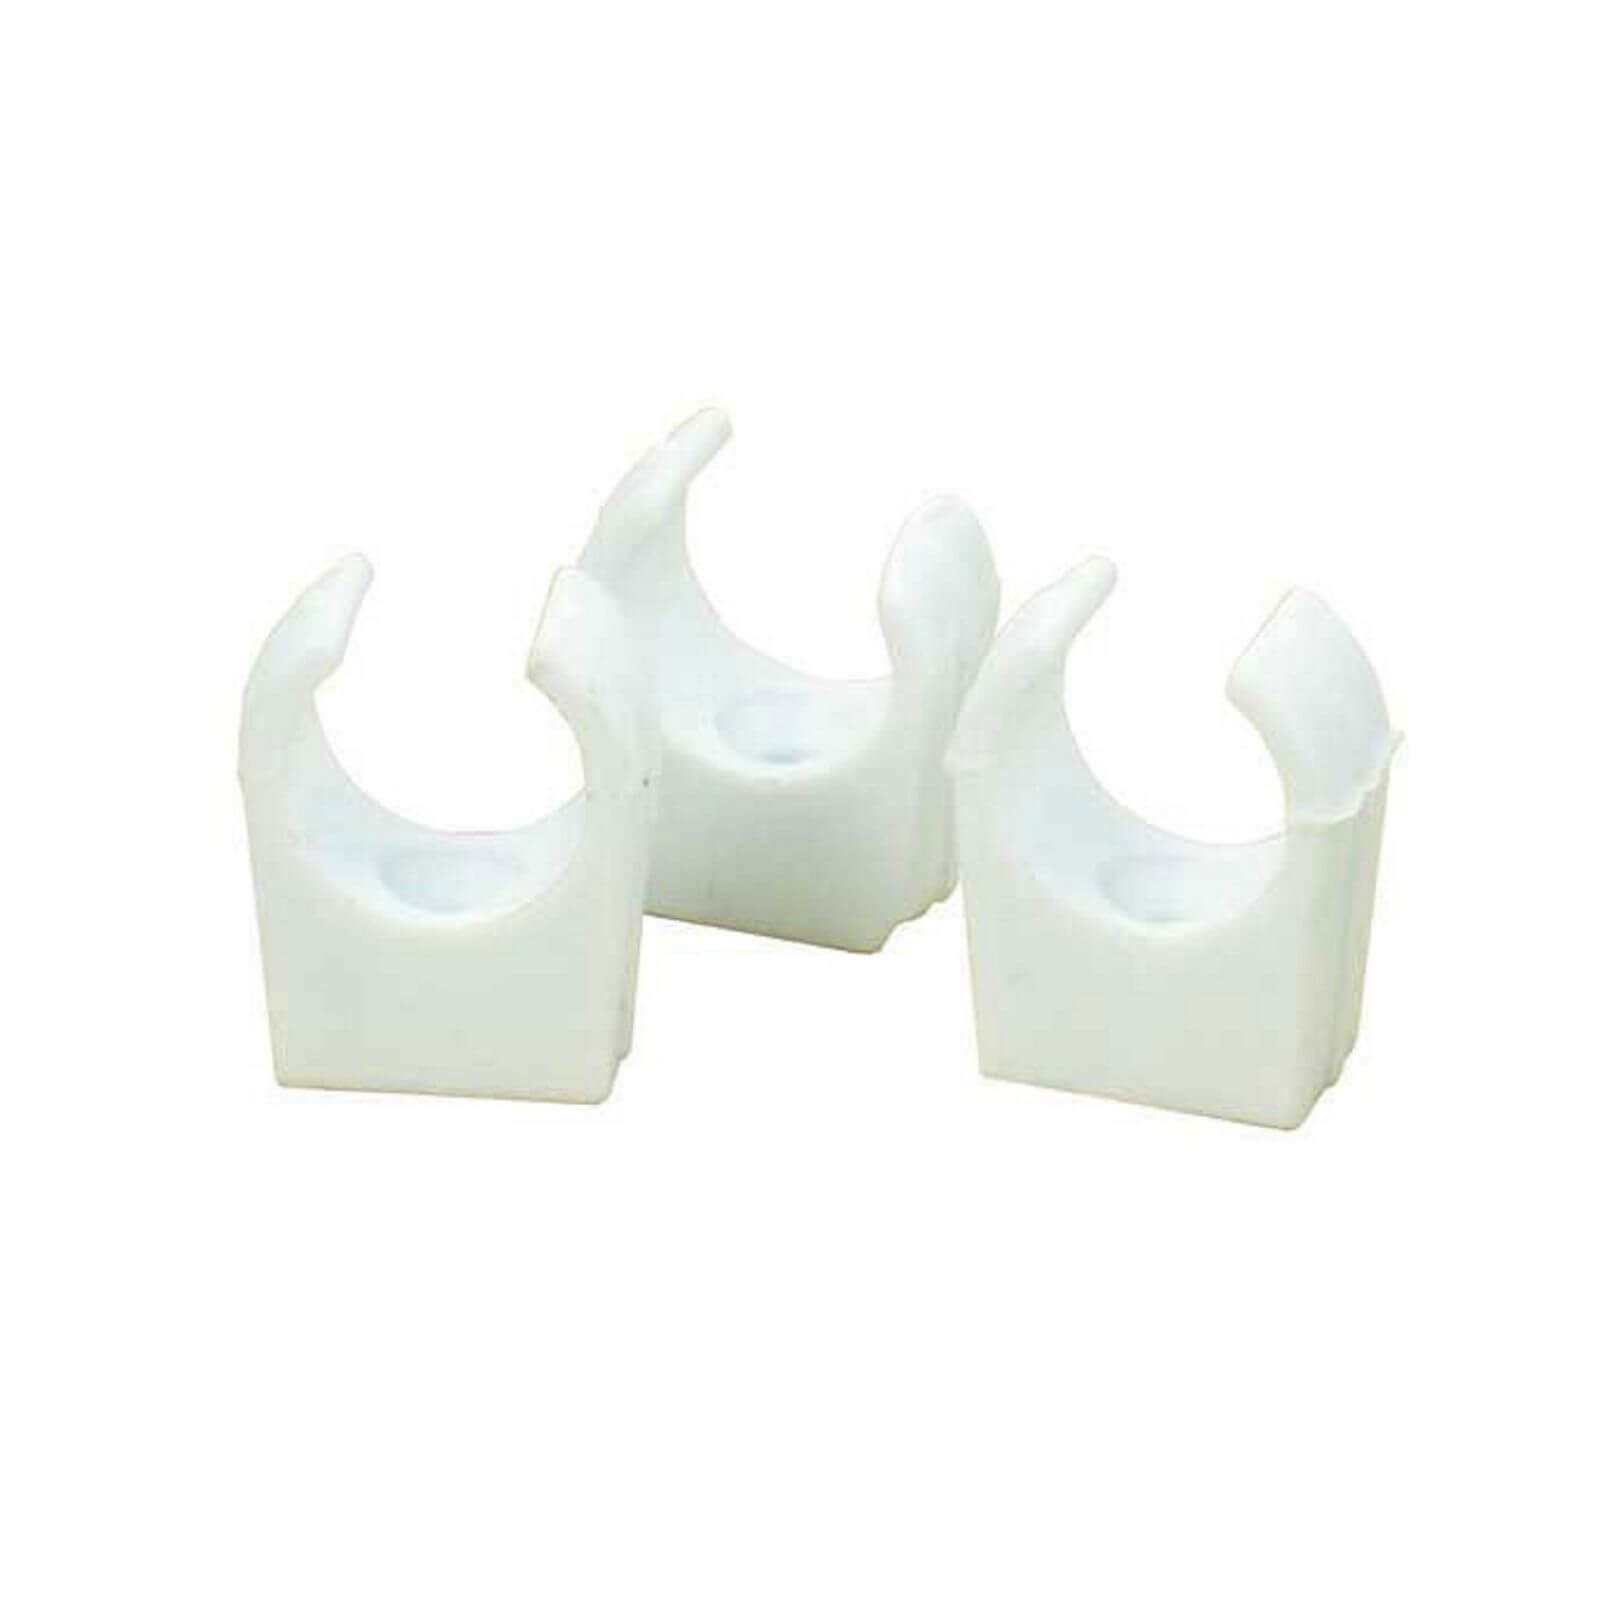 Photo of Open Plastic Pipe Clip - 15mm - 10 Pack